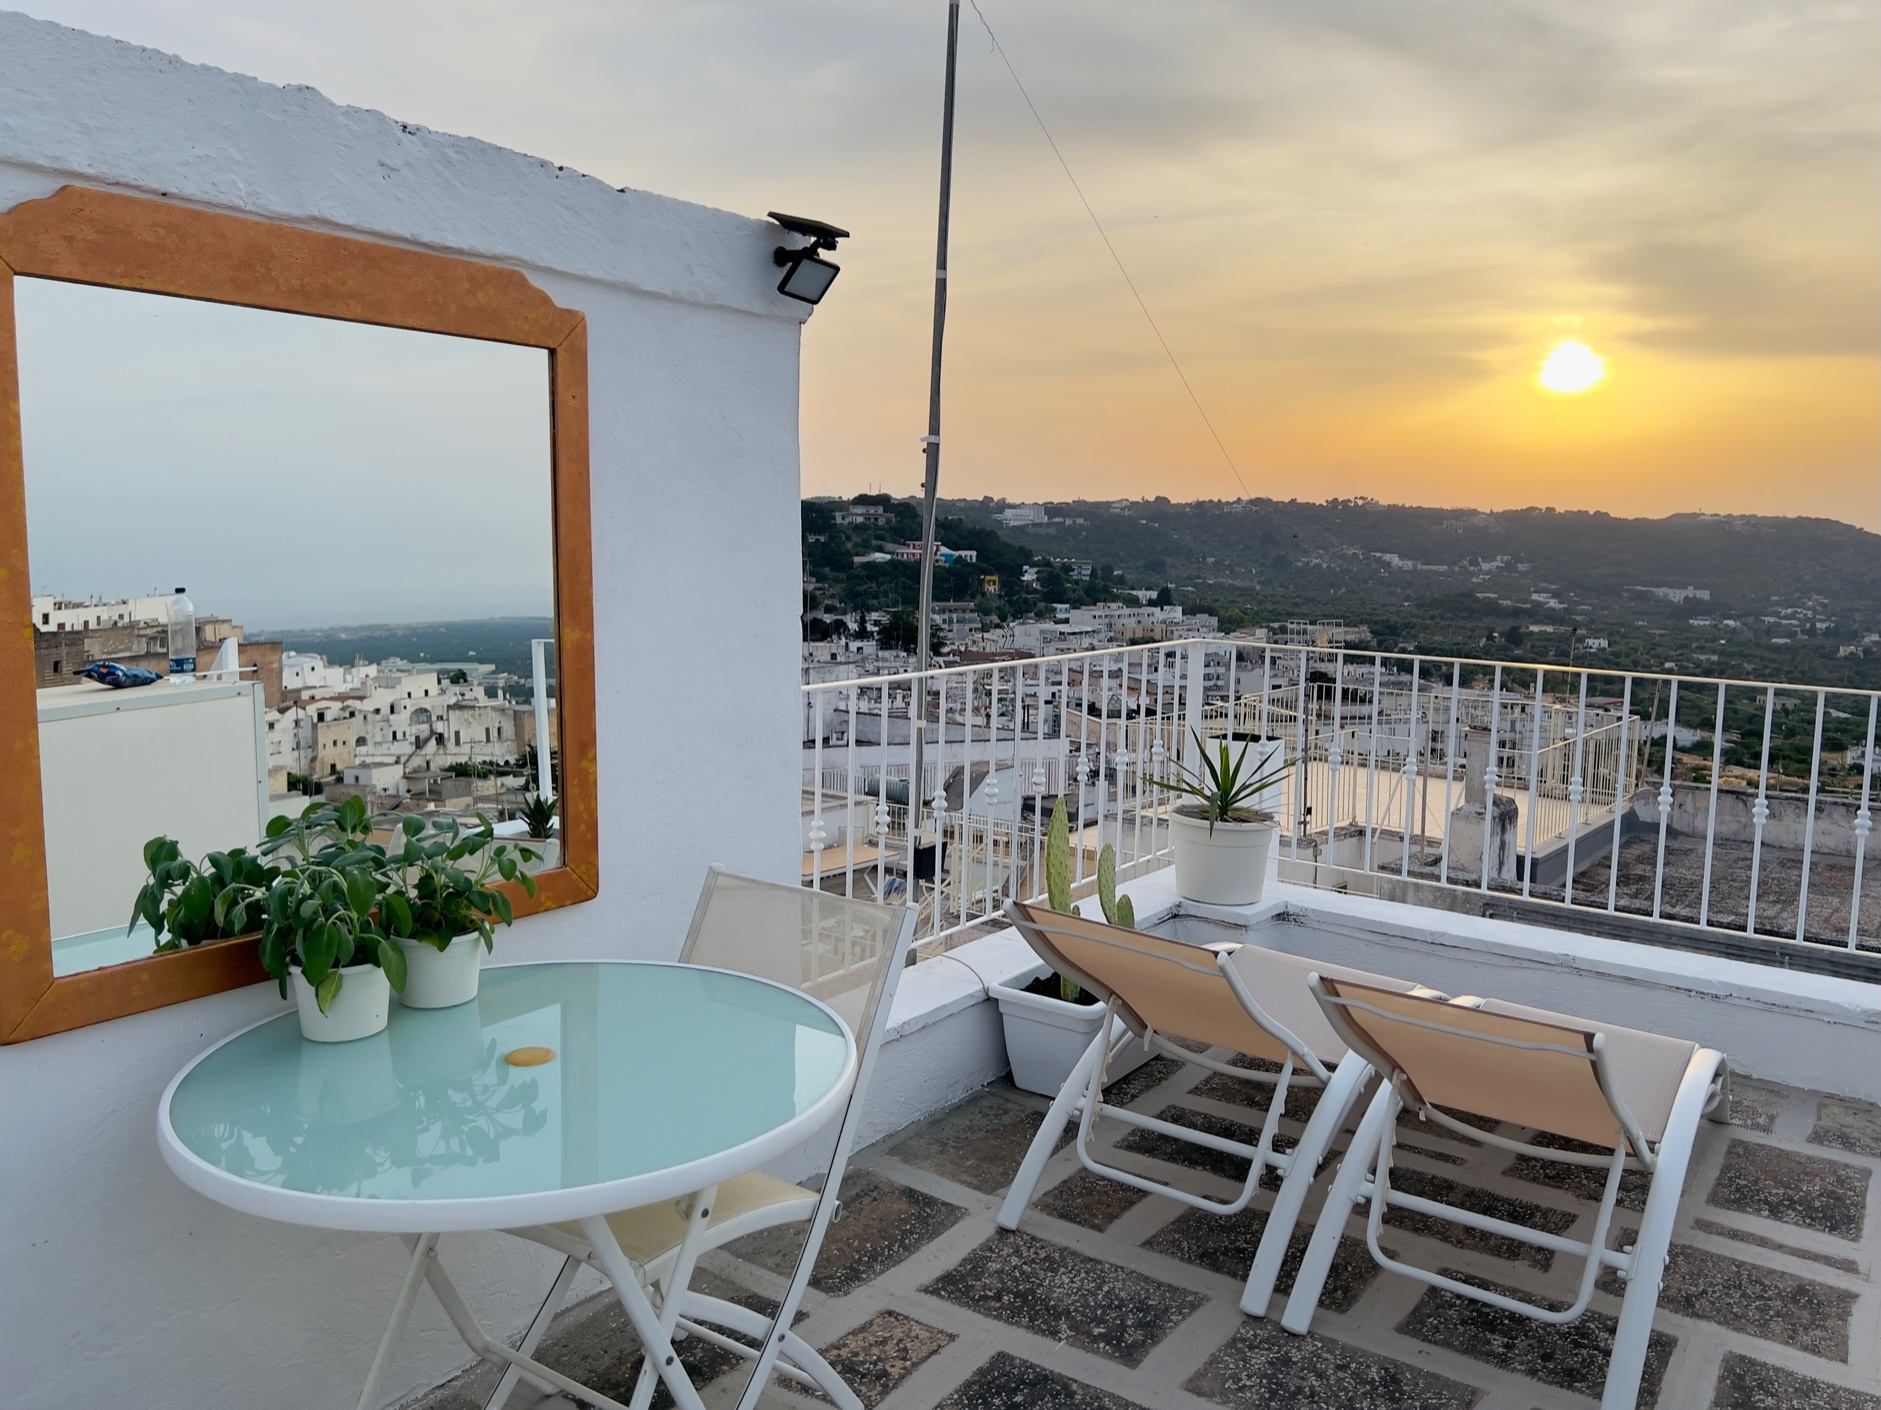 Apartment q|40 is our favorite Ostuni rental apartment based on value, location and style.